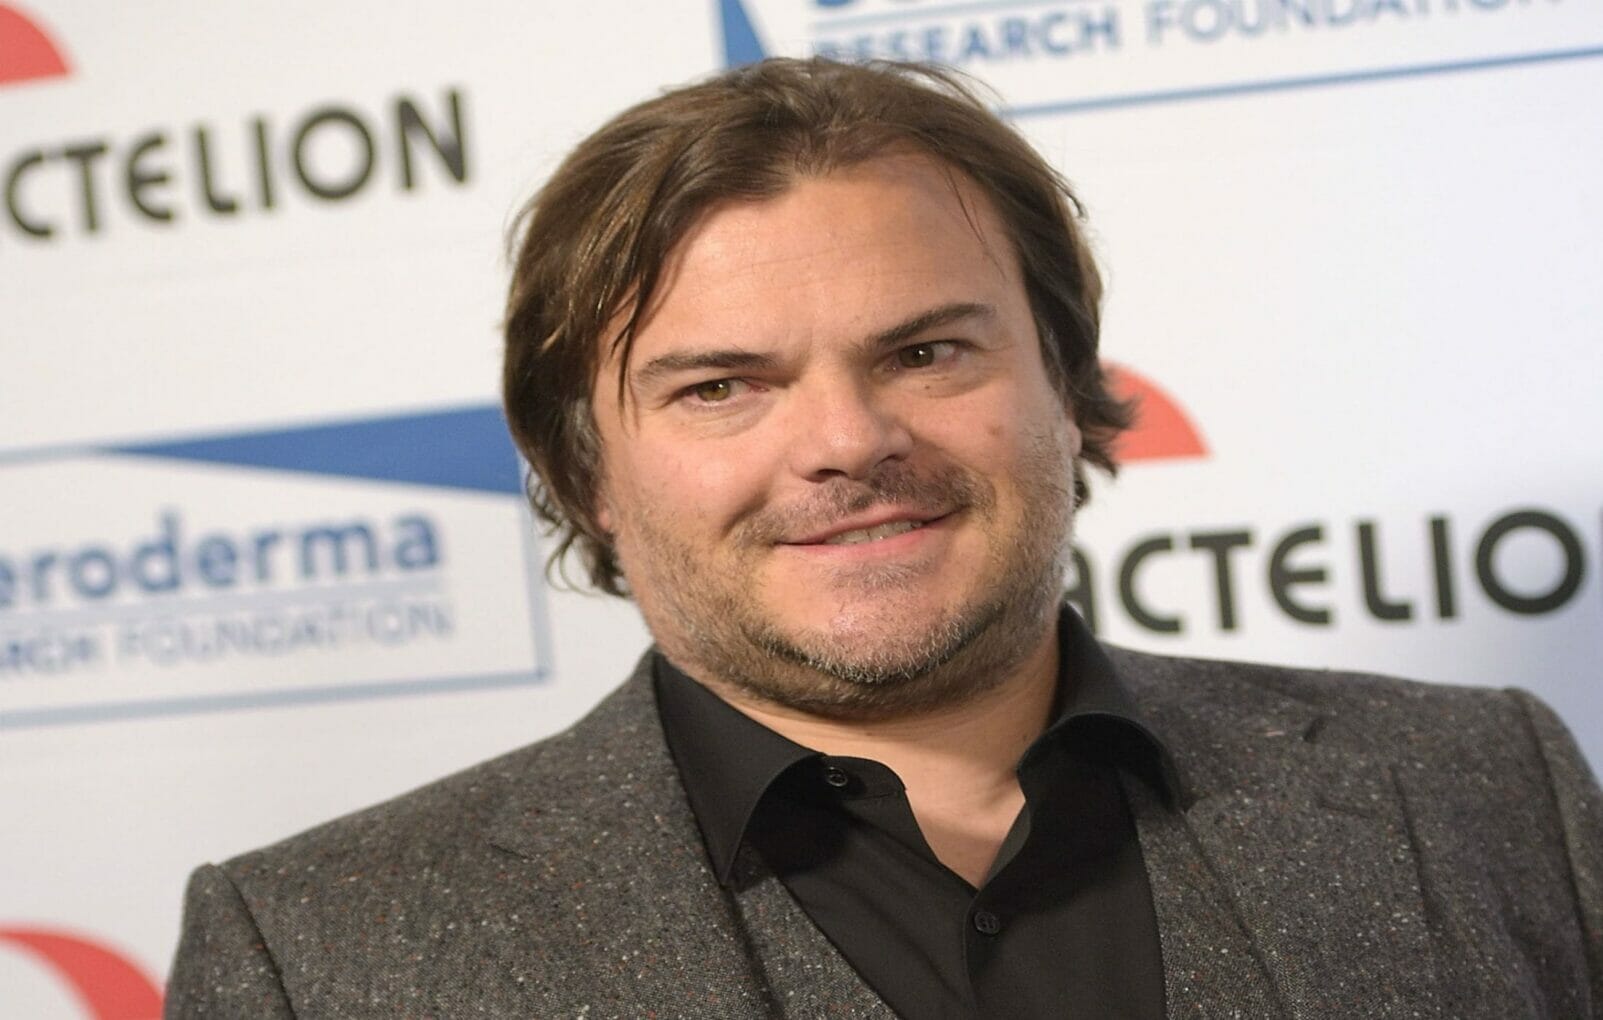 Jack Black • Height, Weight, Size, Body Measurements, Biography, Wiki, Age